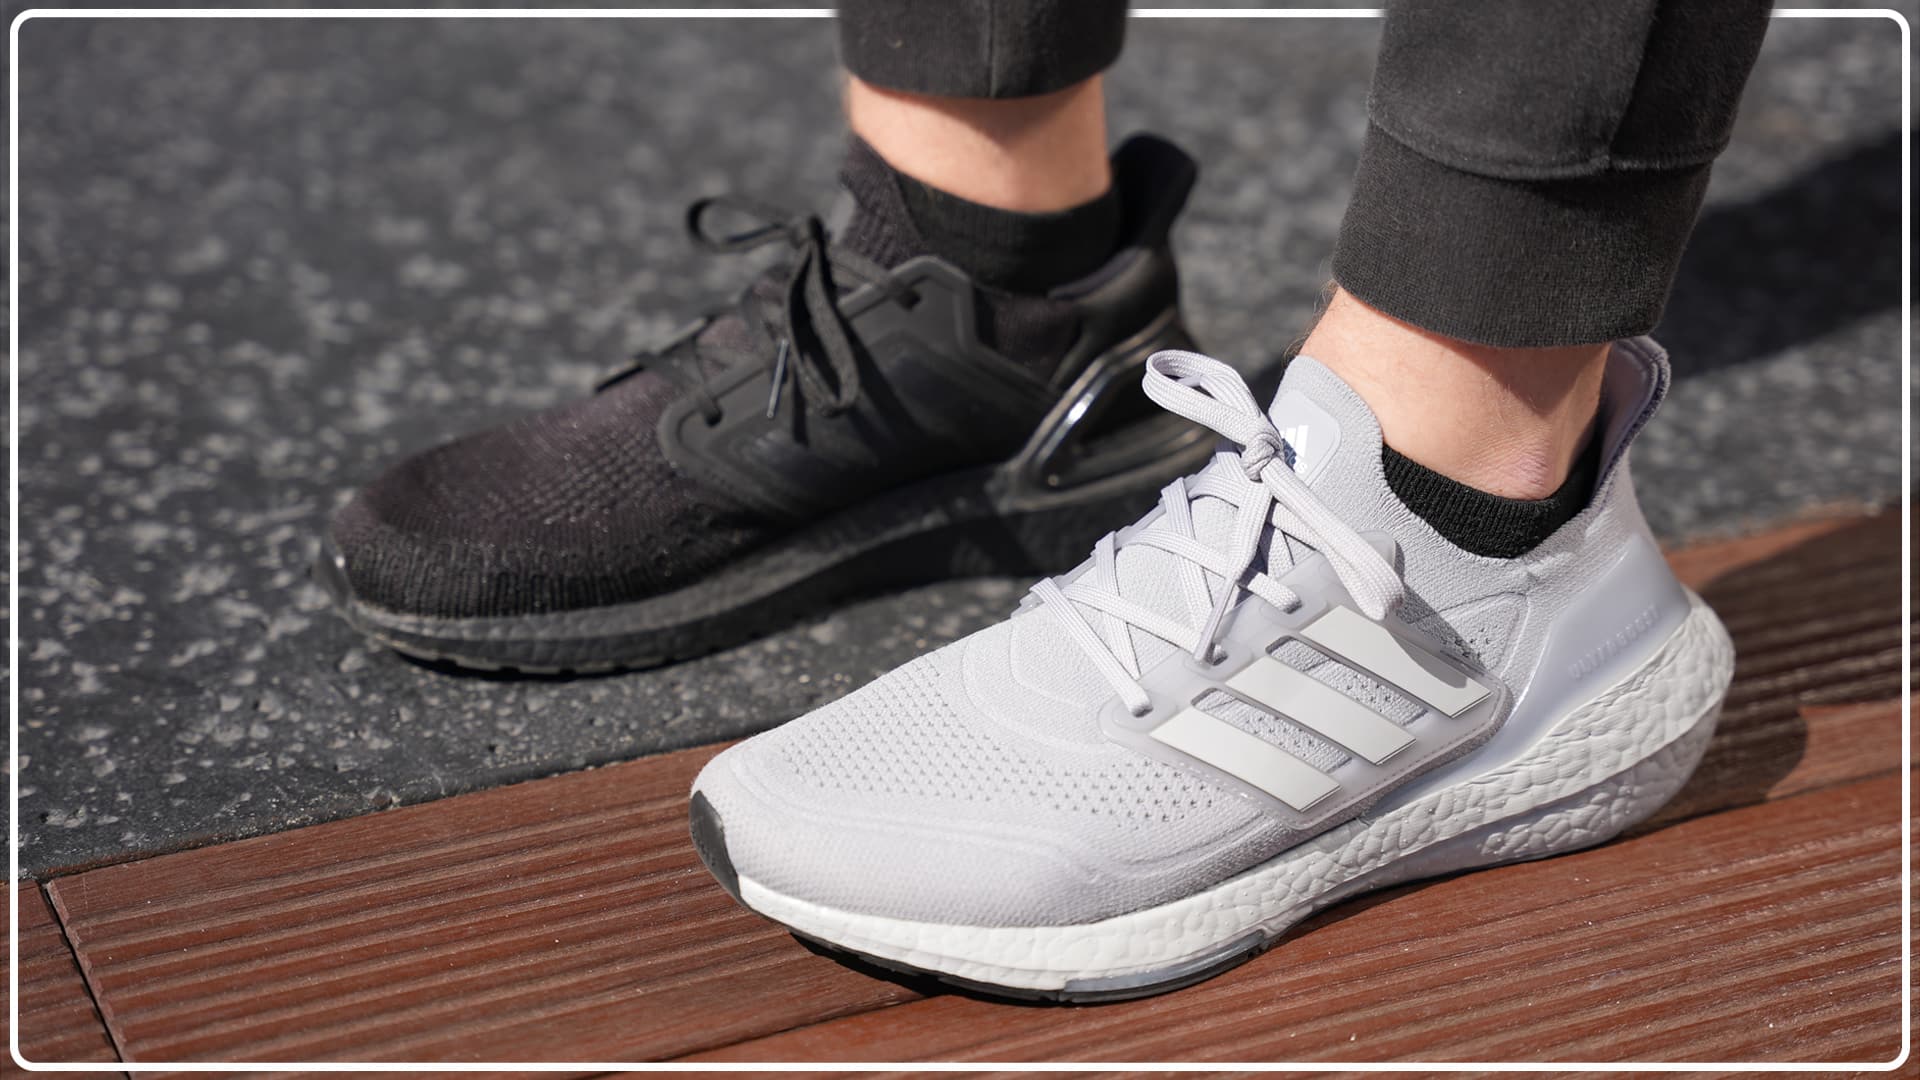 Act Fast! Adidas Ultraboost 21 Is on Sale Now - Slickdeals